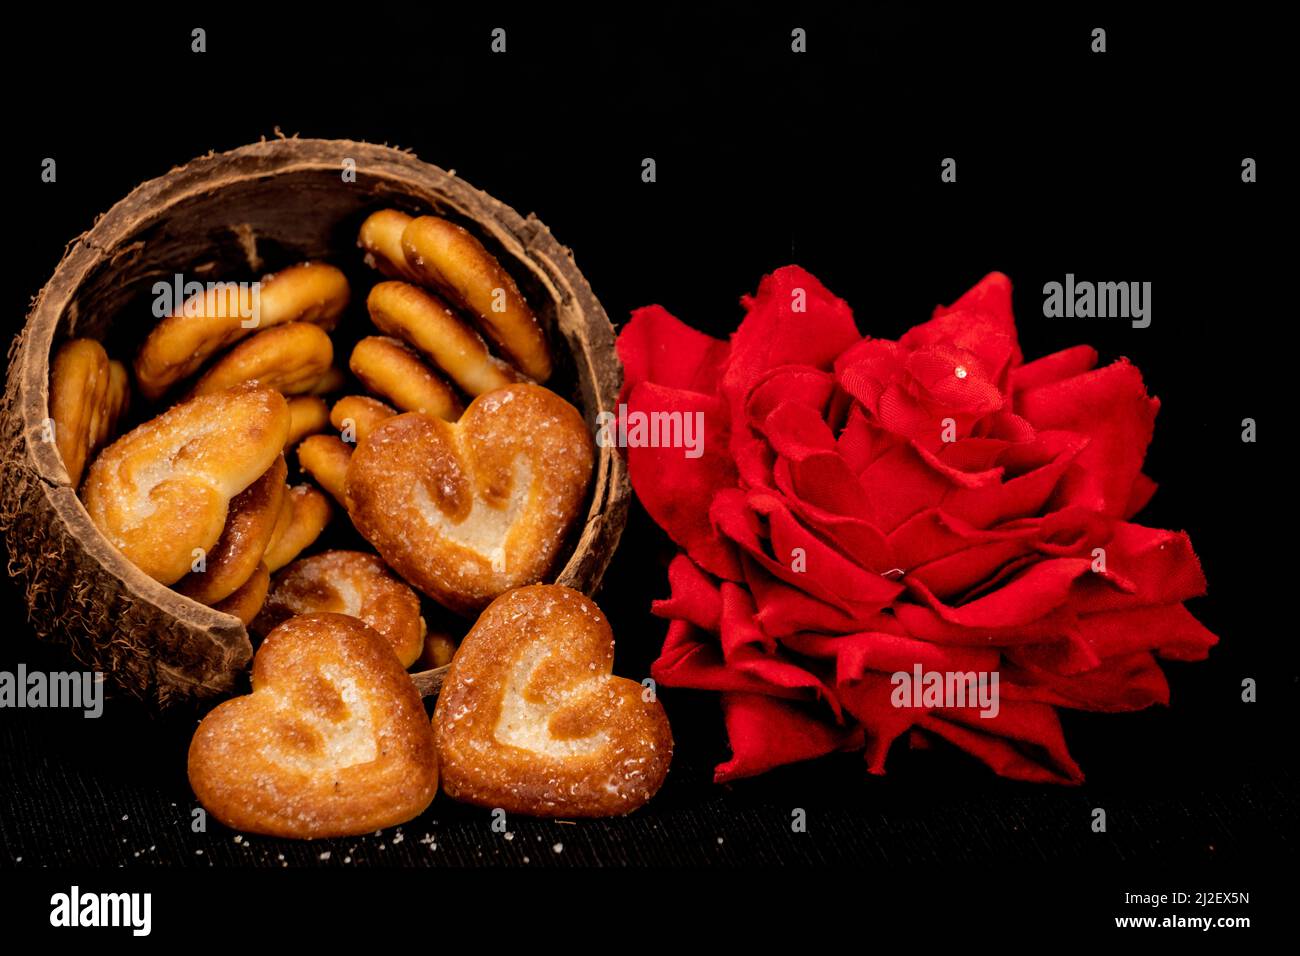 Hearts Shaped Biscuit In Coconut Shell With Red Rose, Isolated With Black Background Stock Photo